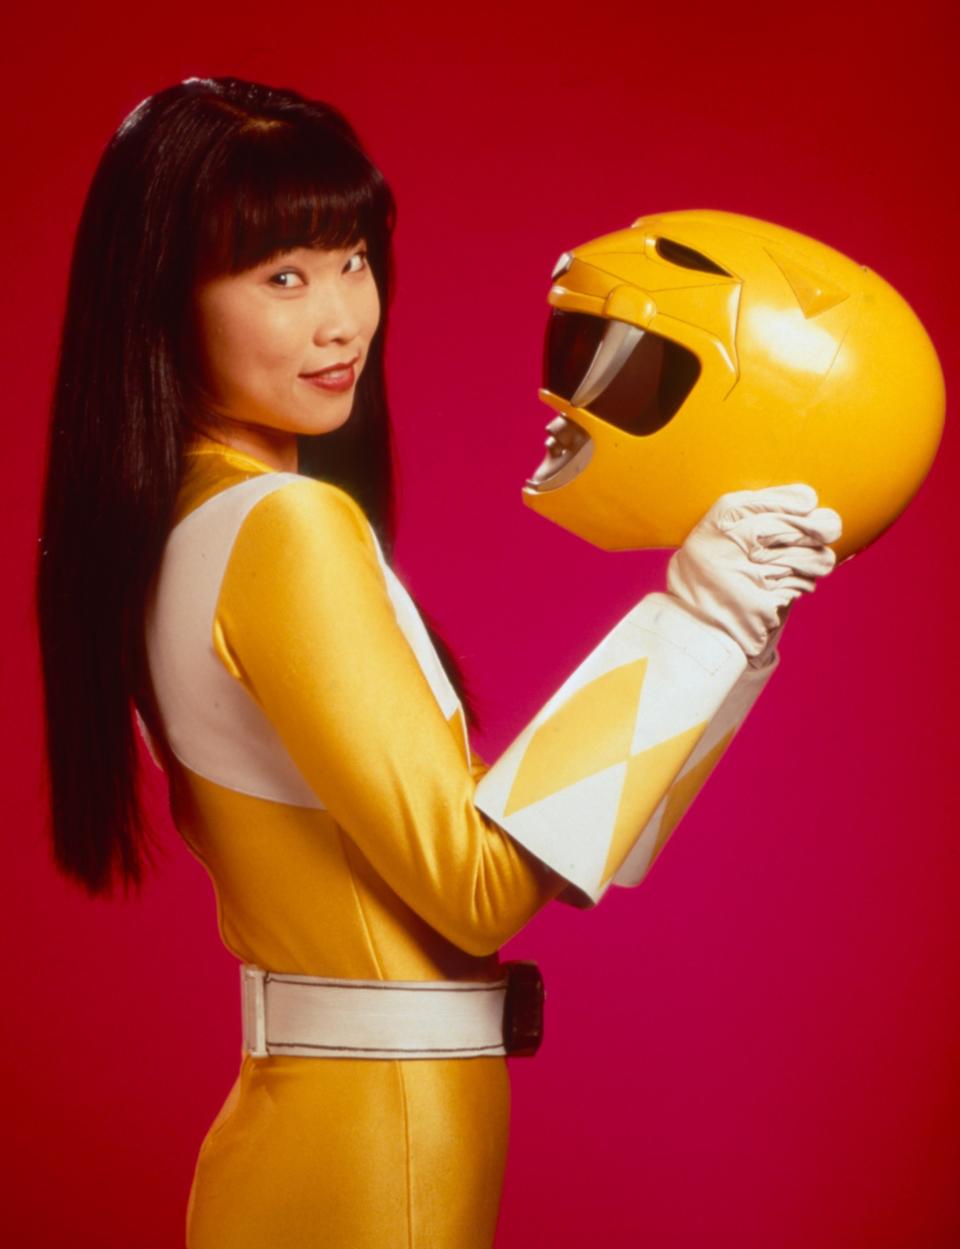 Thuy Trang in a yellow and white Power Rangers suit, holding a yellow helmet